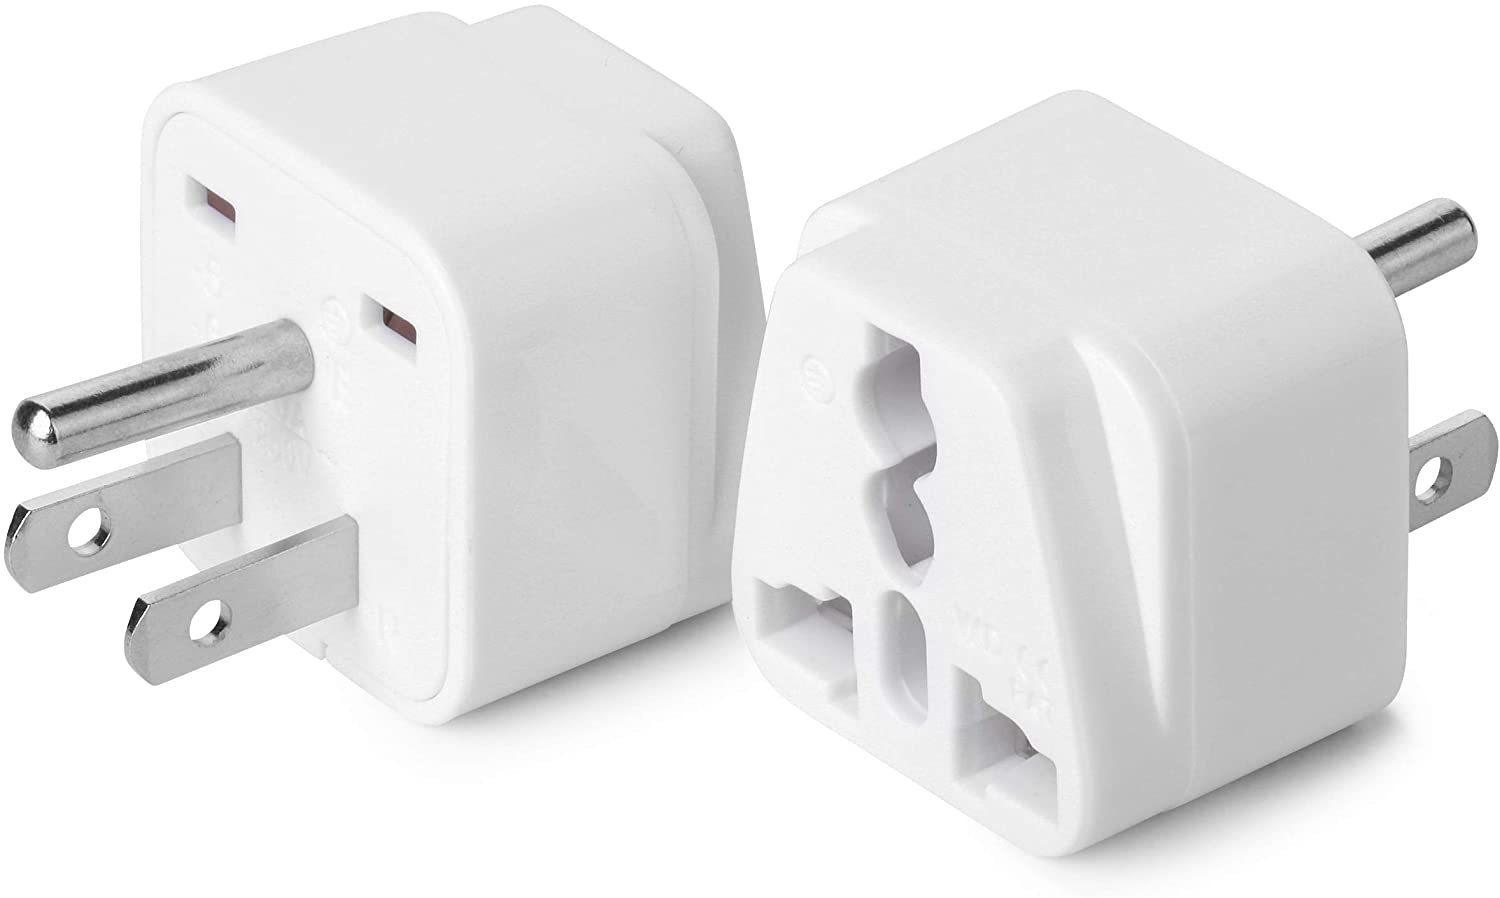 actrice uitlijning stereo Bates- Universal to American Outlet Plug Adapter, 2 Pack, Canada Universal  Travel Plug Adapter, 2 pc, UK to US Adapter, US Plug Adapter - Bates Choice